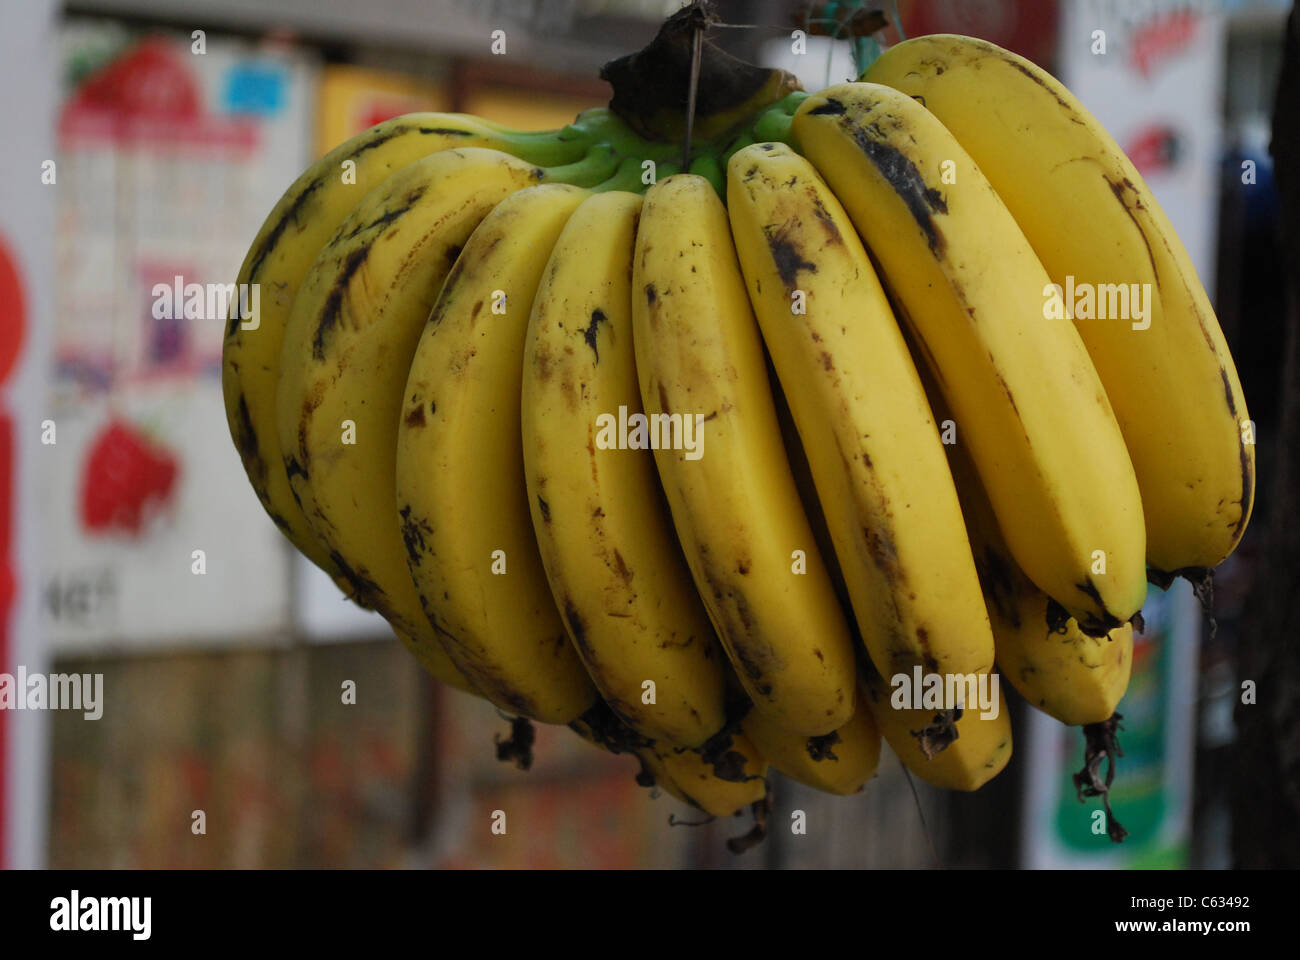 Banana bunch cluster Stock Photo by ©happystock 42506967